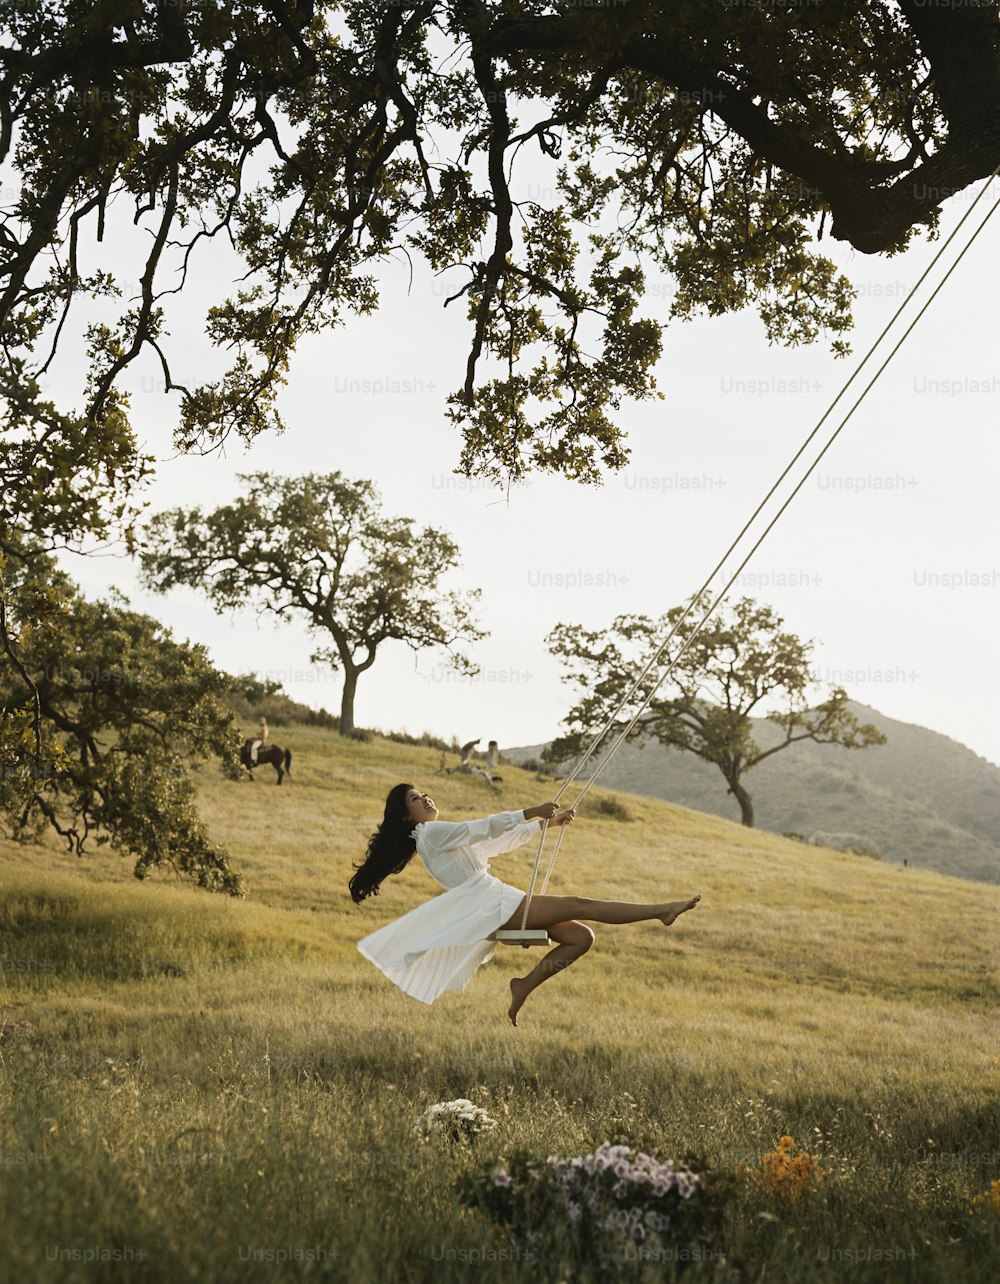 a woman flying through the air while wearing a white dress